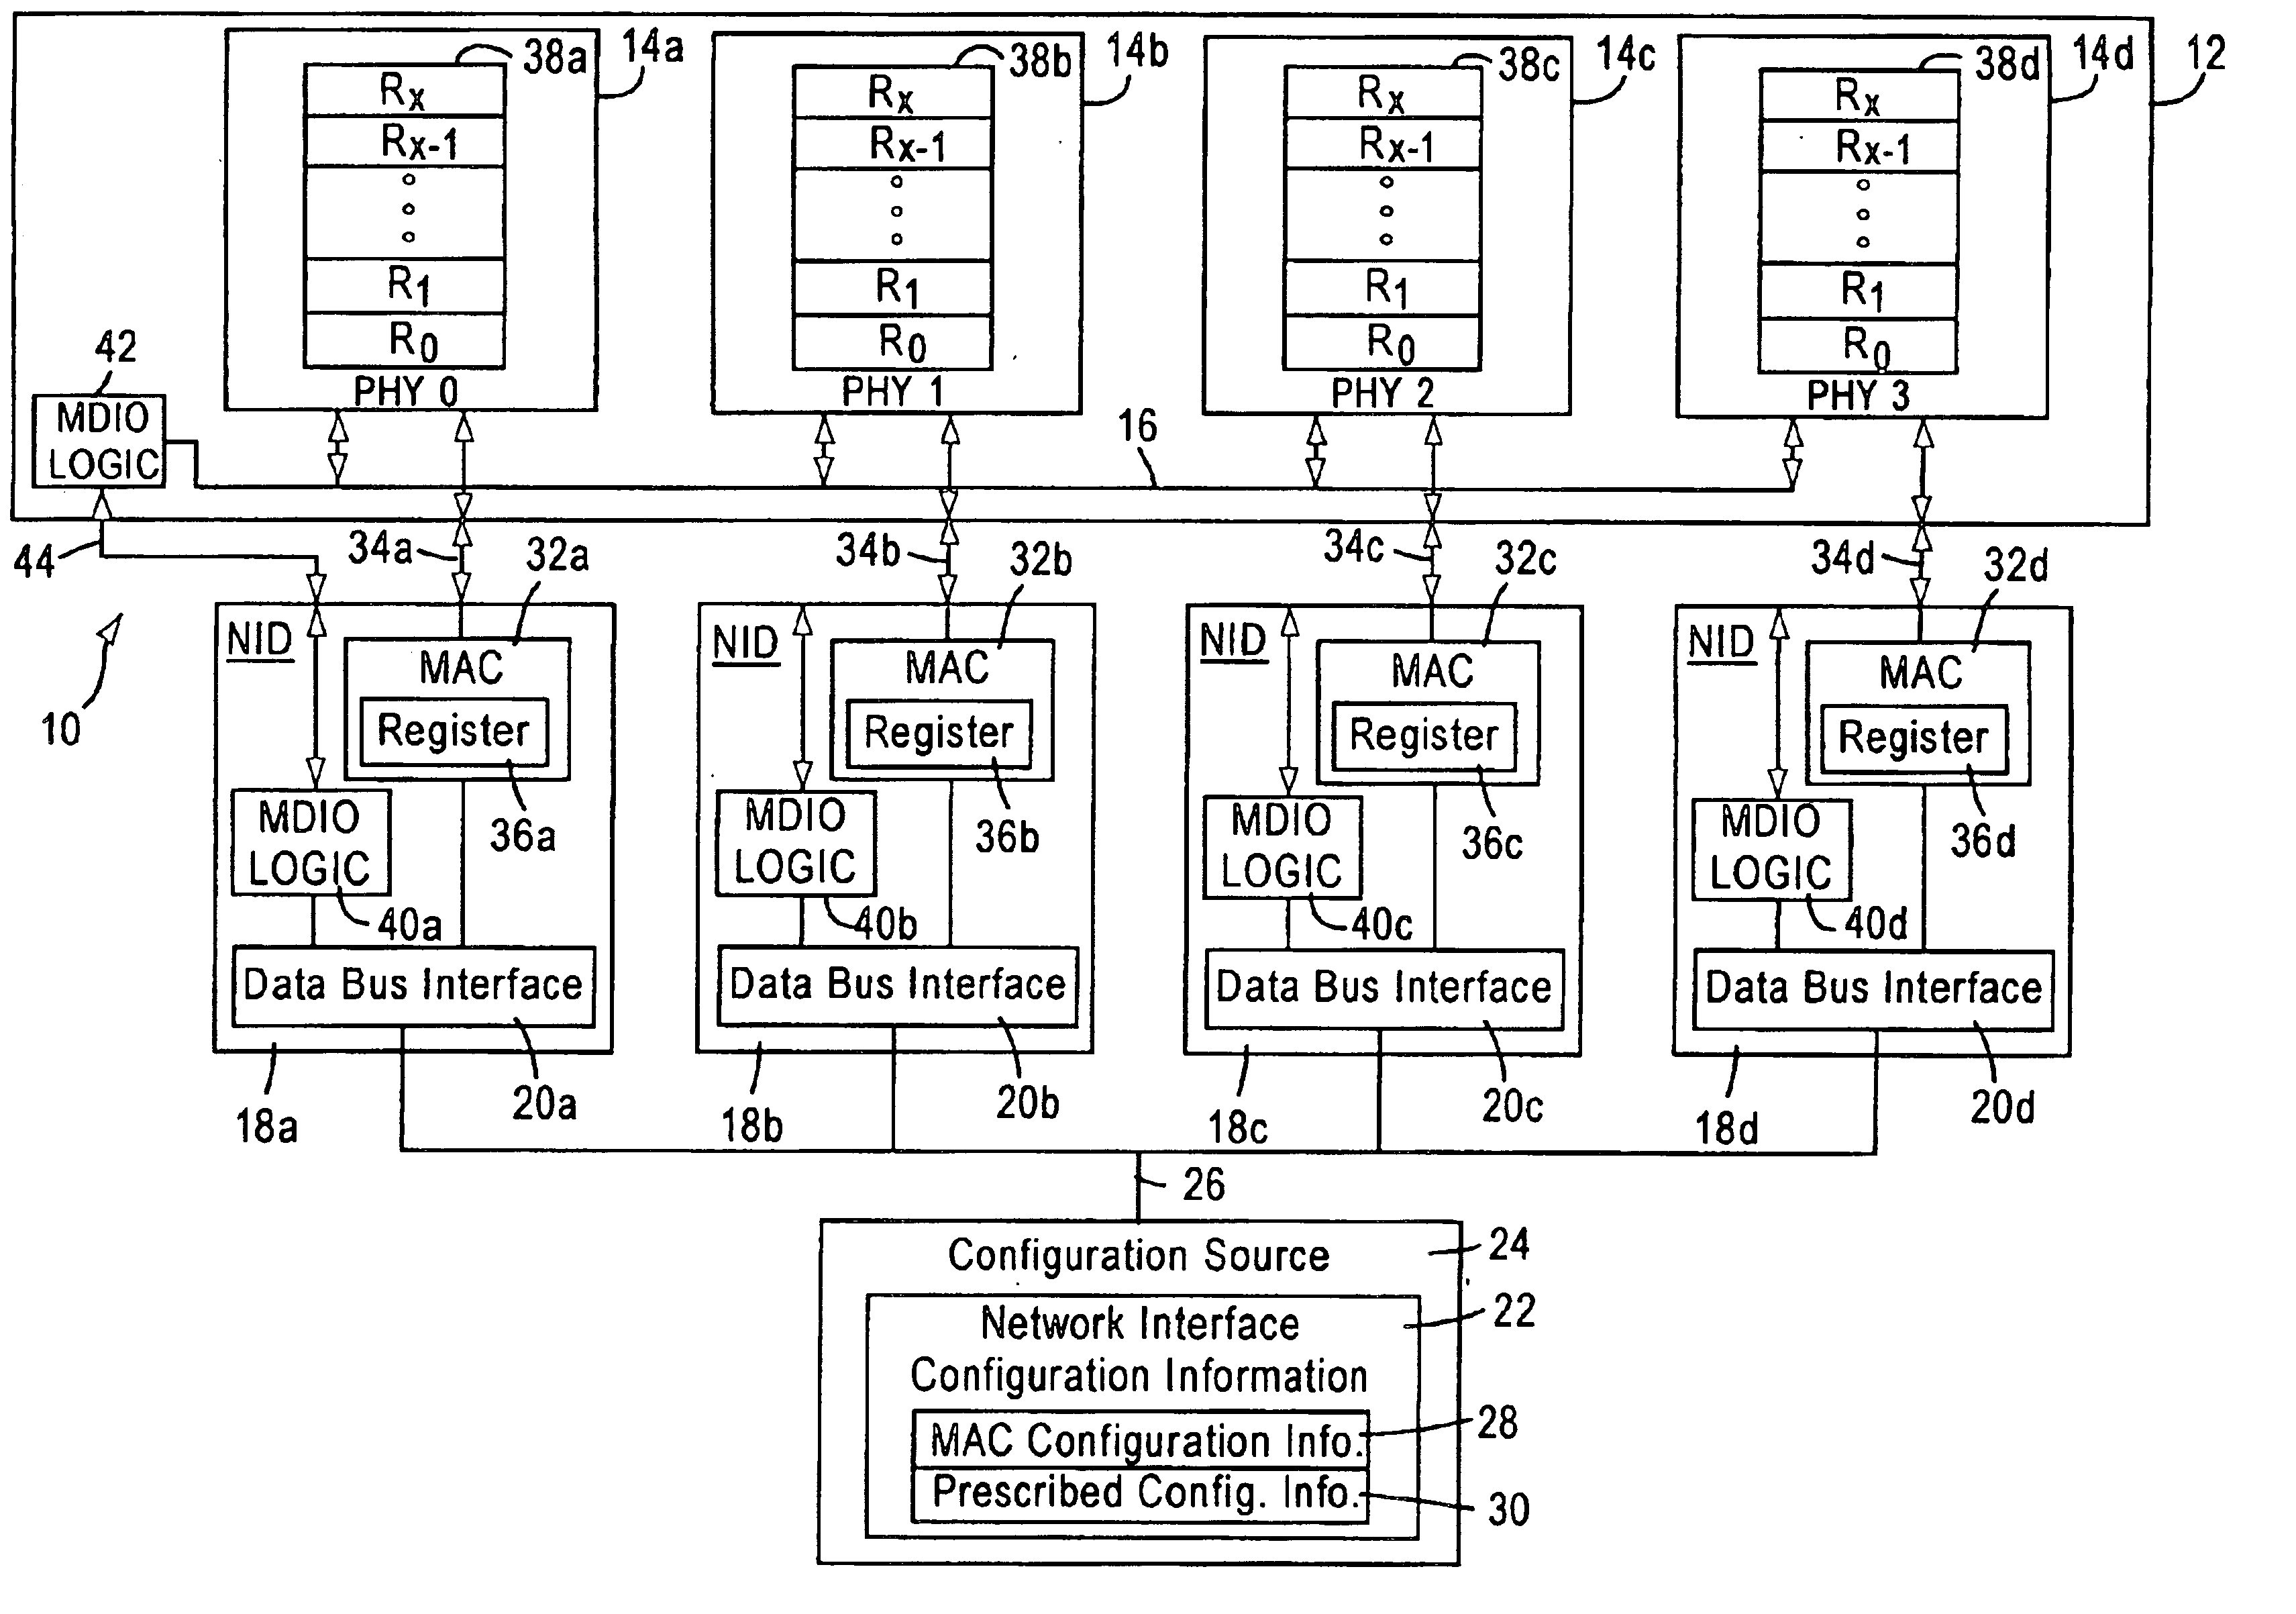 System and method enabling configuration of physical layer devices and corresponding link partners for communicating network data via a configuration source or auto-negotiation